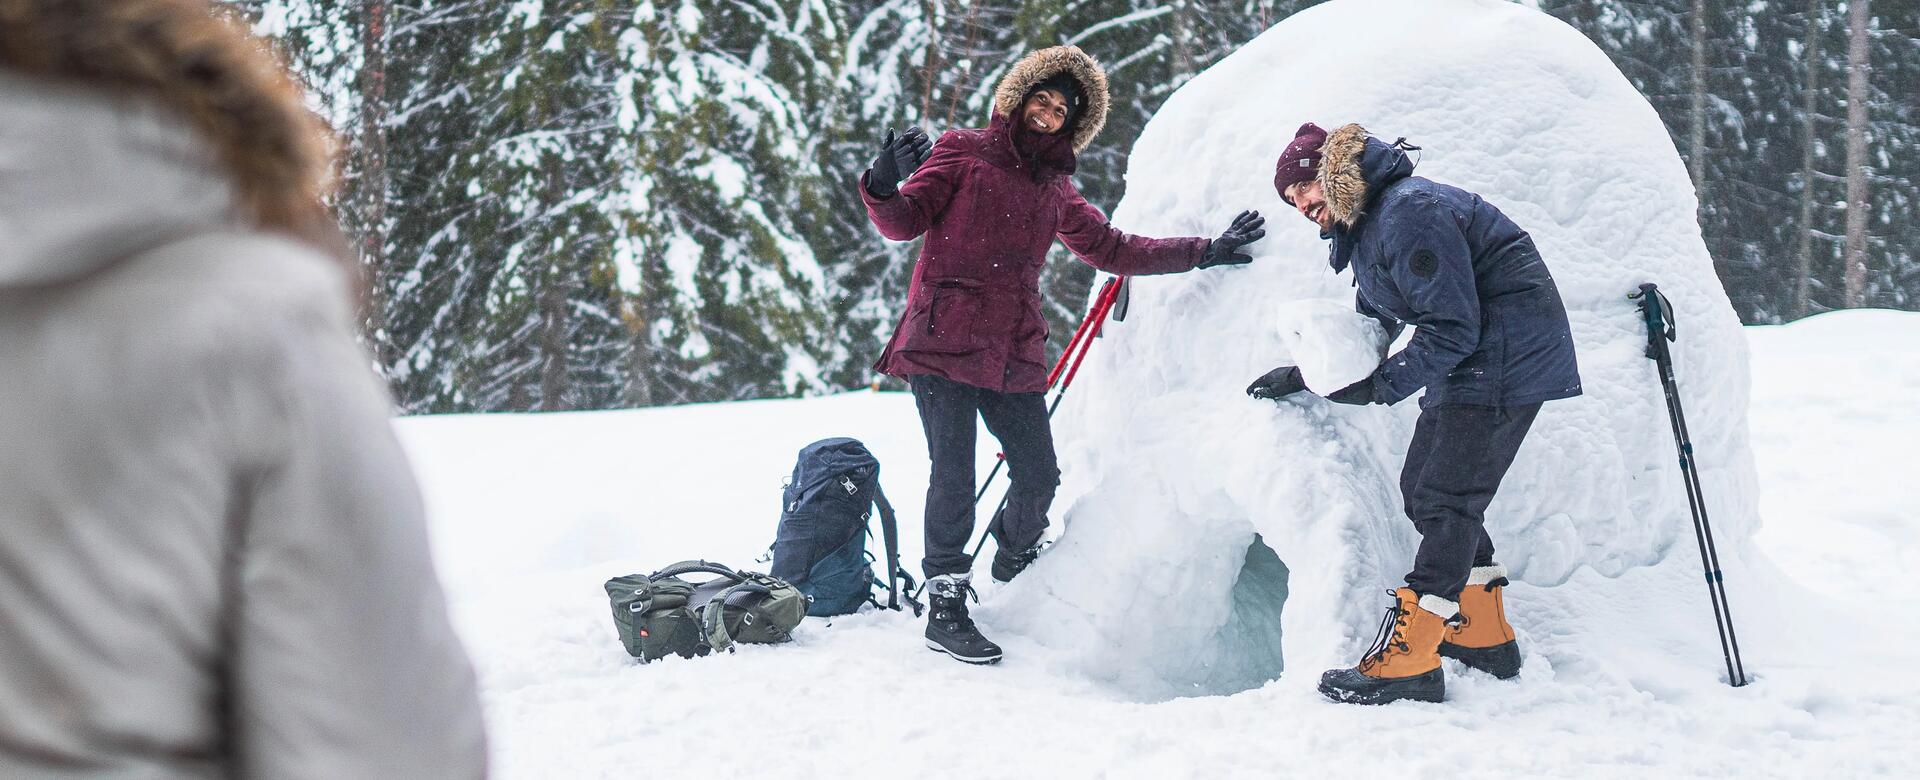 Comment construire son igloo